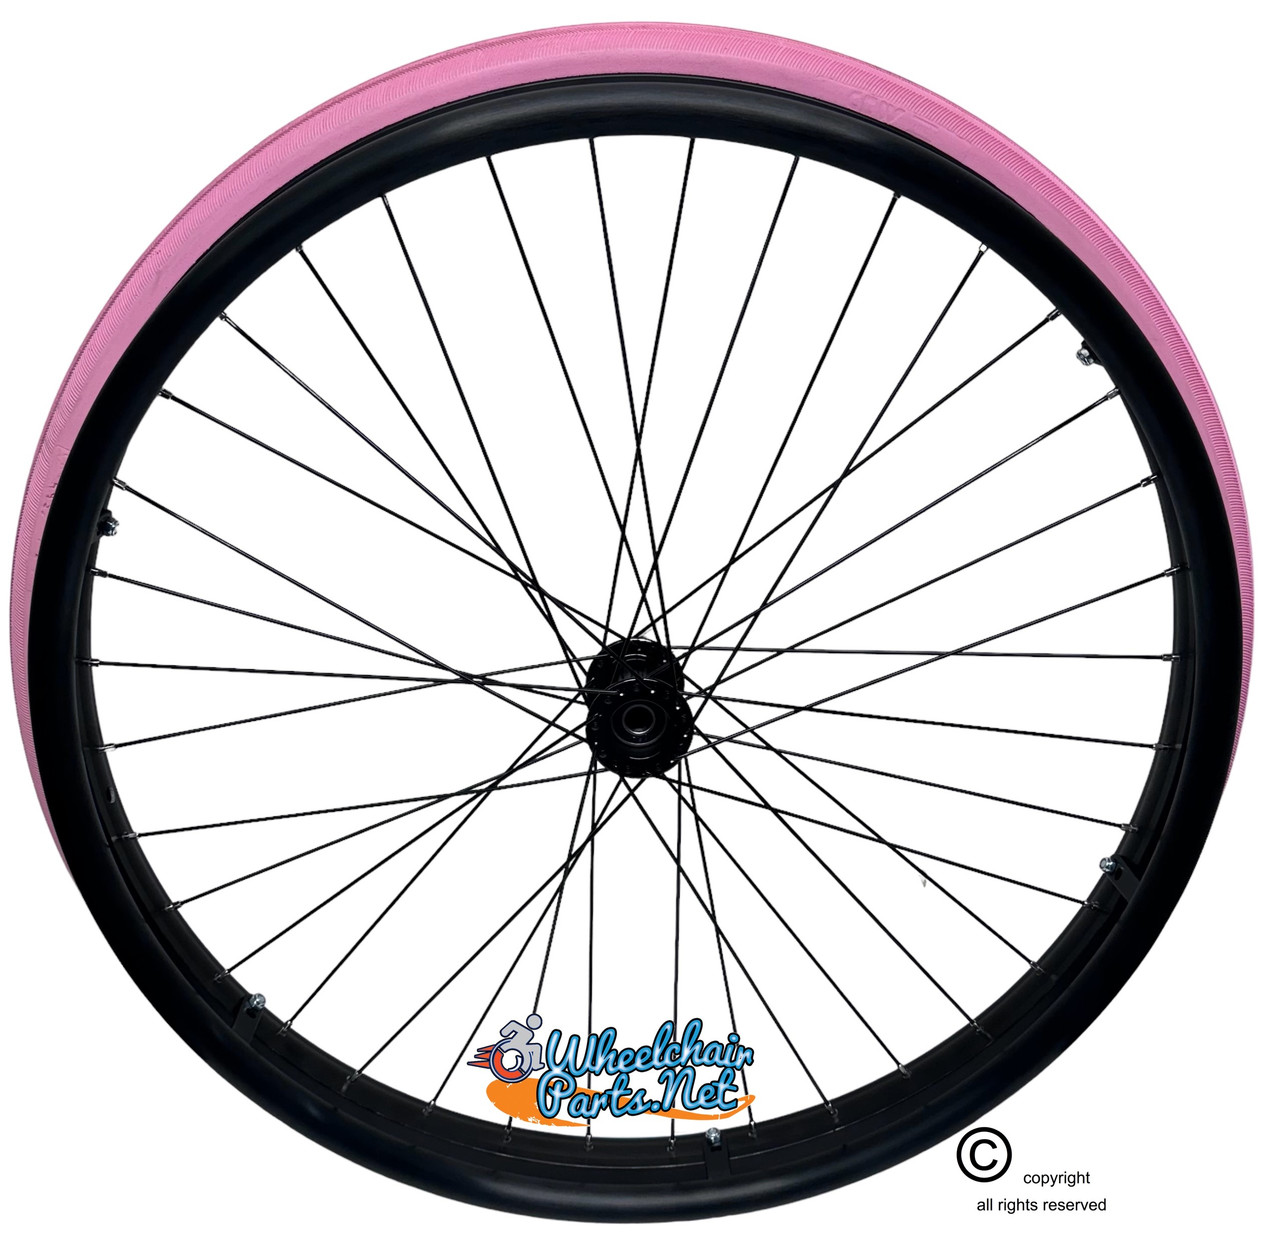 SET of 2,  24" (540mm) 36 Spoke Rim with SHOX Solid Tire in Pink Color